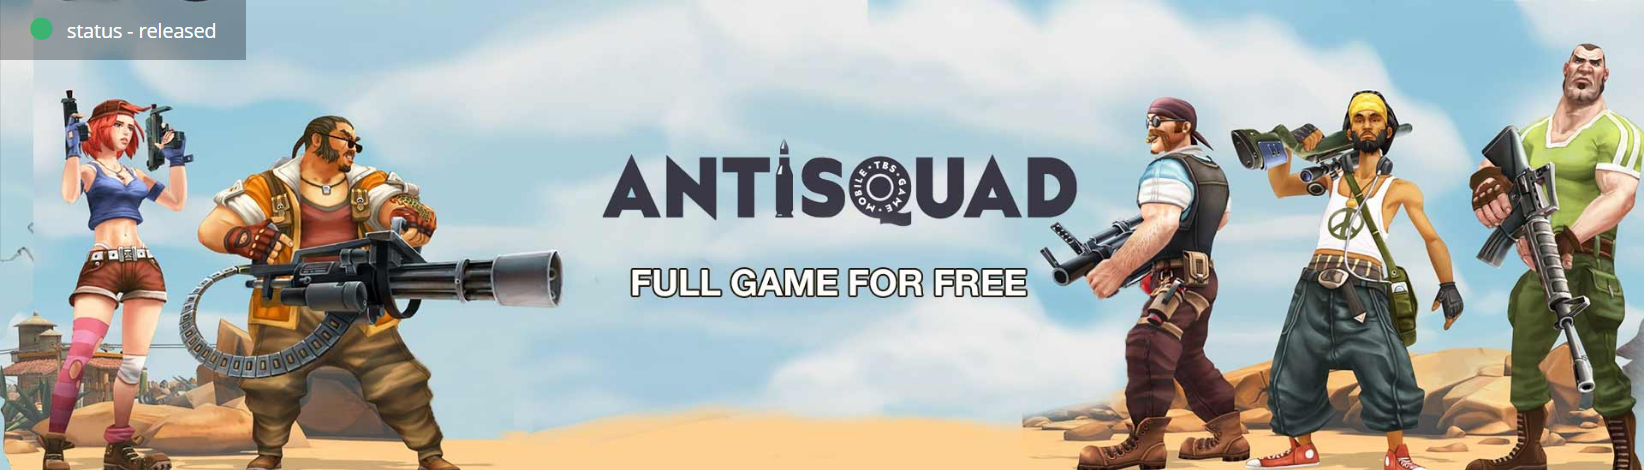 Screenshot_2019-02-27 Antisquad Indiegala Developers.png